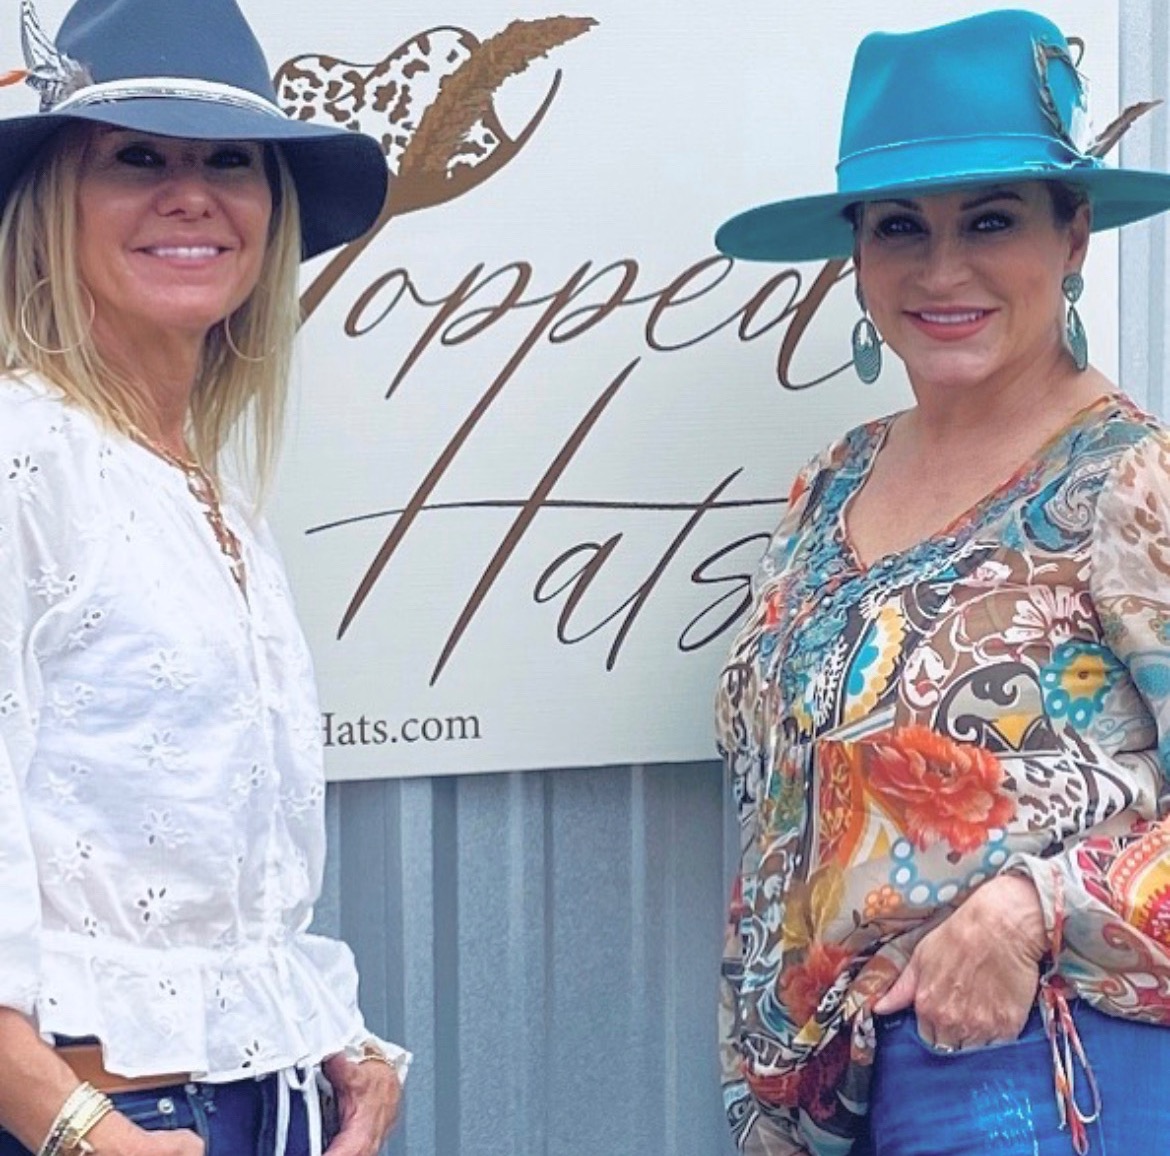 Owners of Topped Hats: Dana Vidal and Linda Uphoff